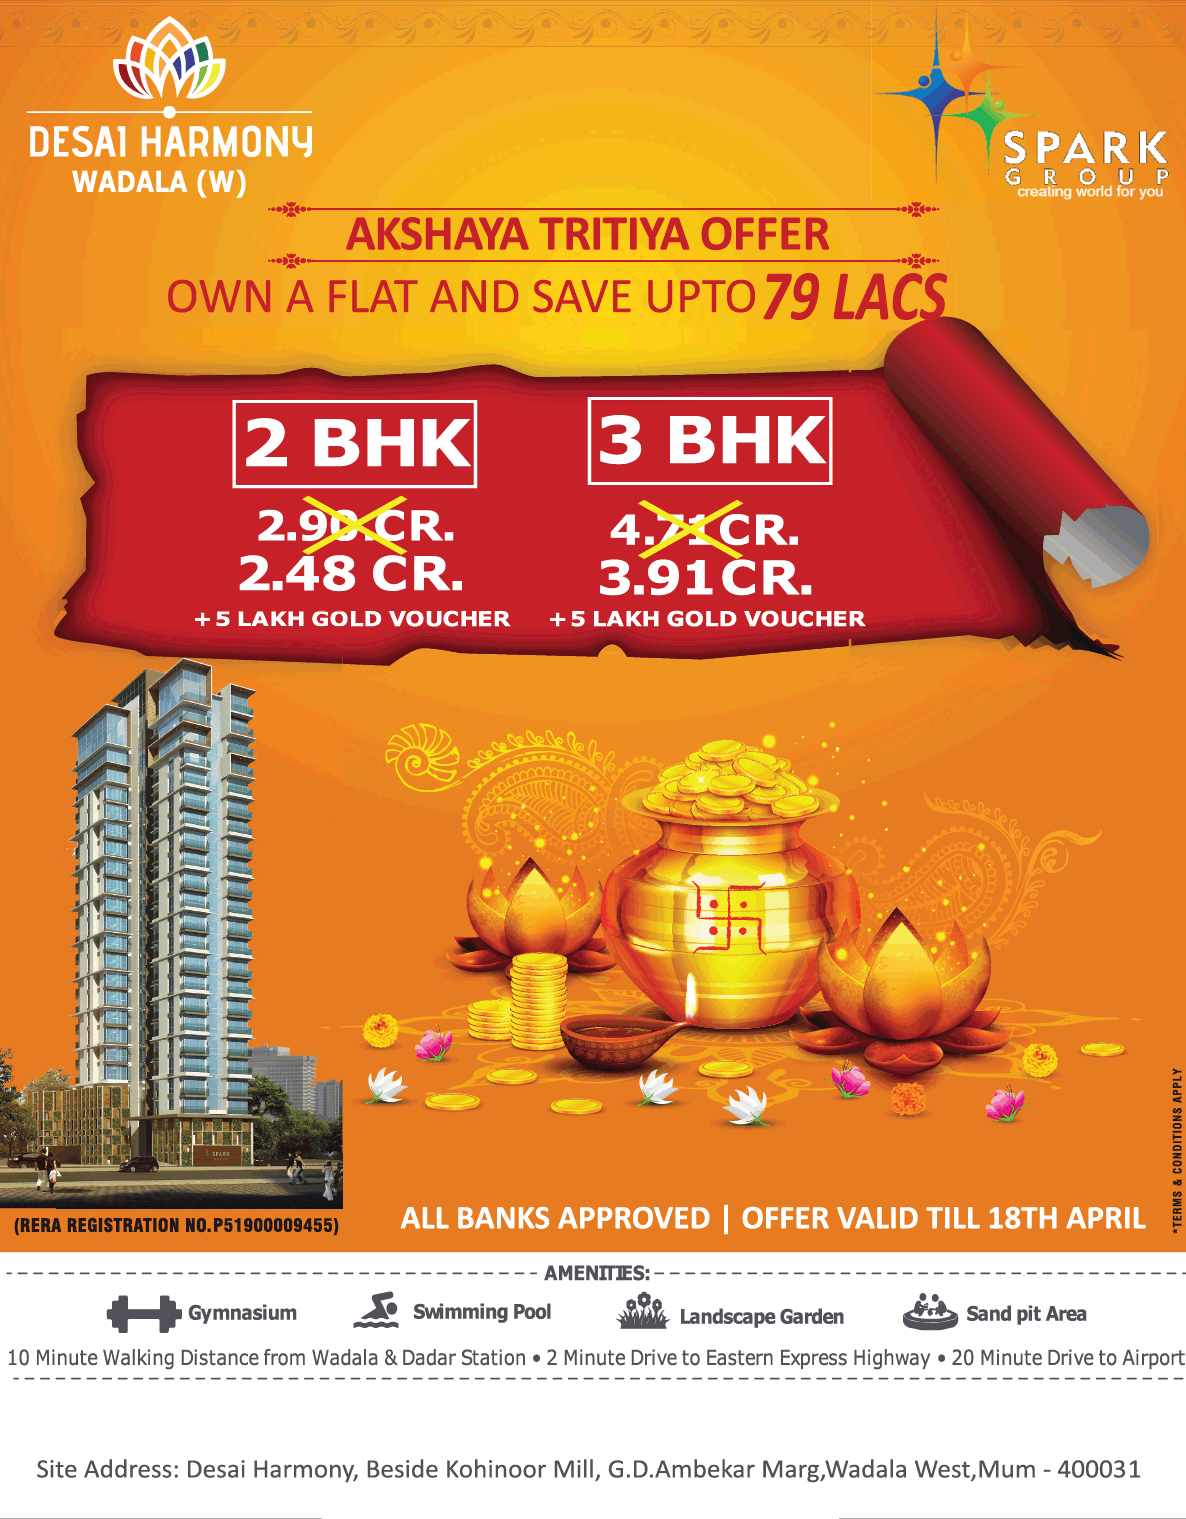 Own a flat & save up to Rs. 79 Lacs during Akshaya Tritiya Offer at Spark Desai Harmony in Mumbai Update